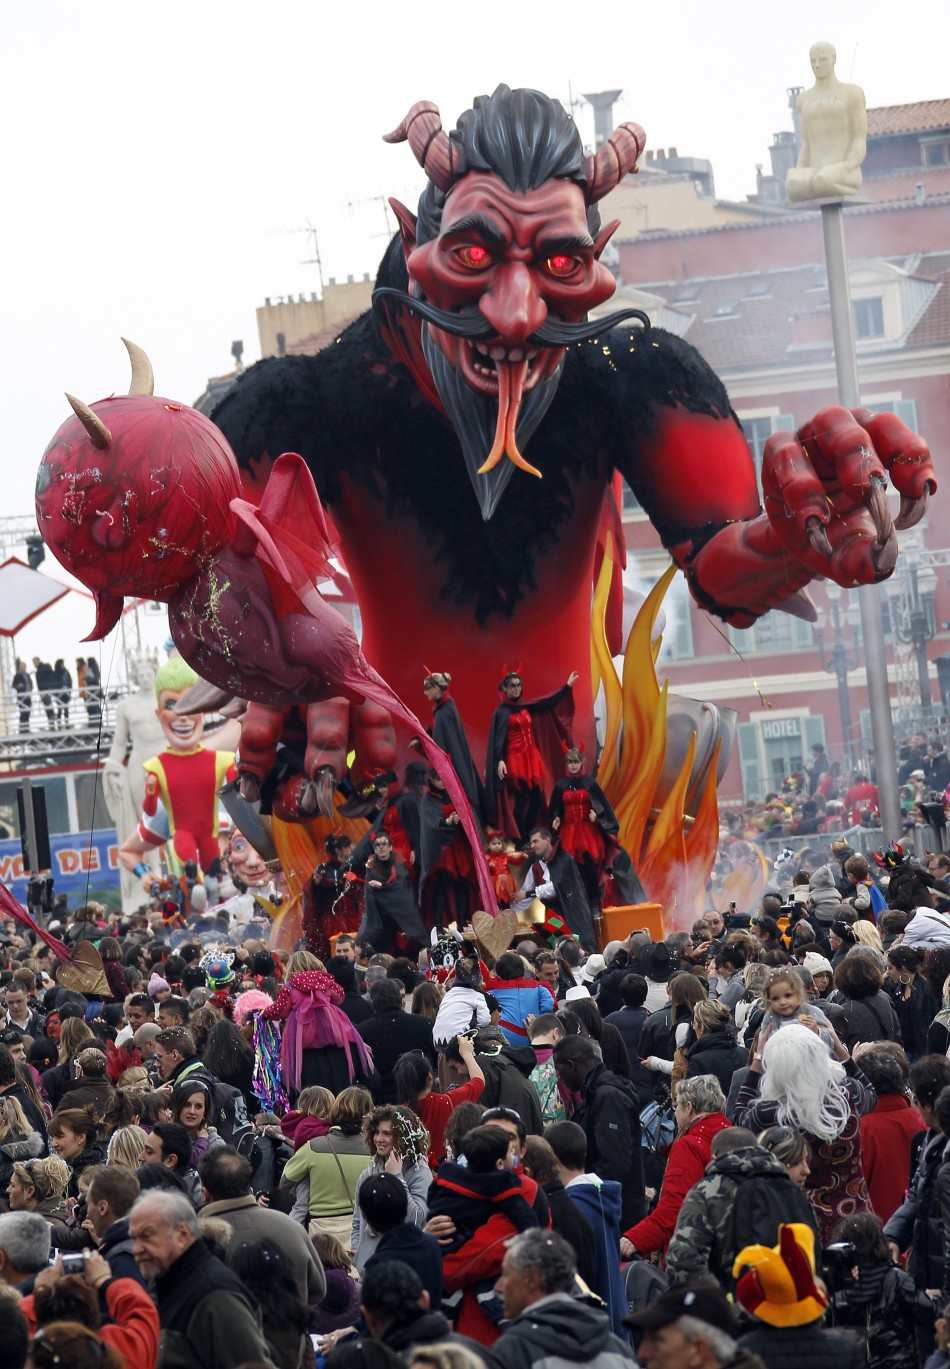 A float with a giant figure representing a devil is paraded during the Nice Carnival